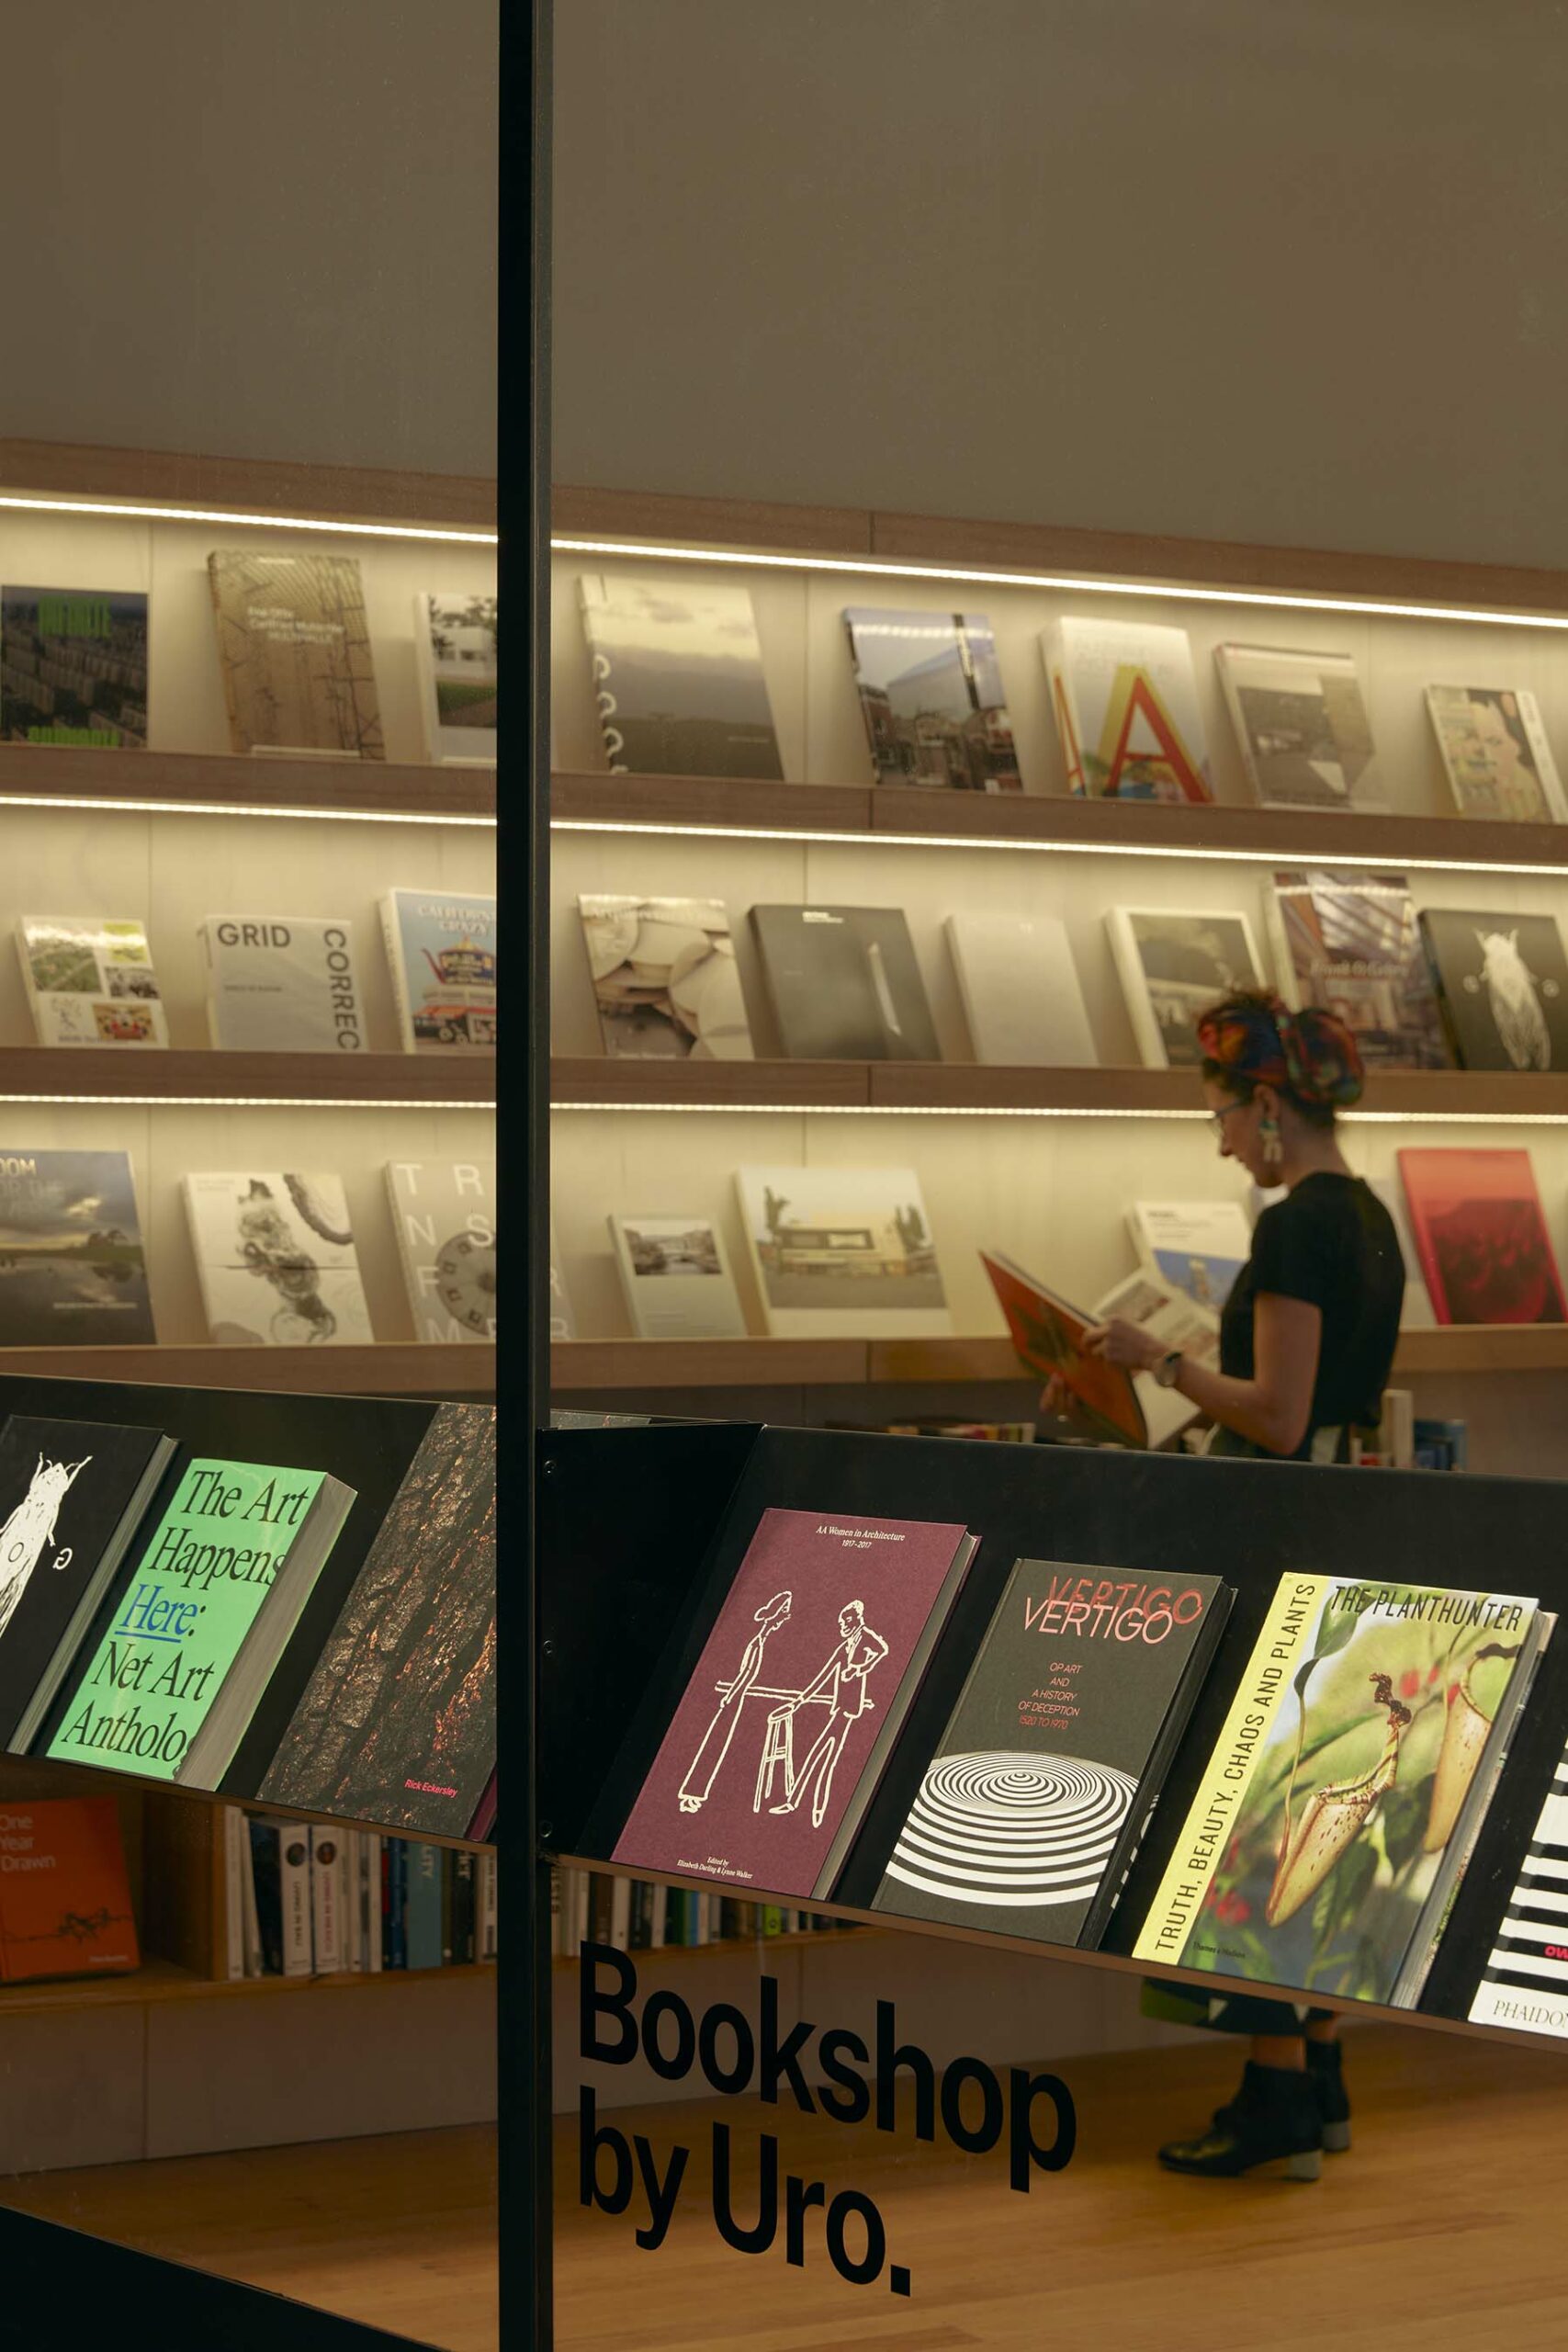 The window of Bookshop by Uro. Walls and shelves of books are visible, and a person is browsing the books available.